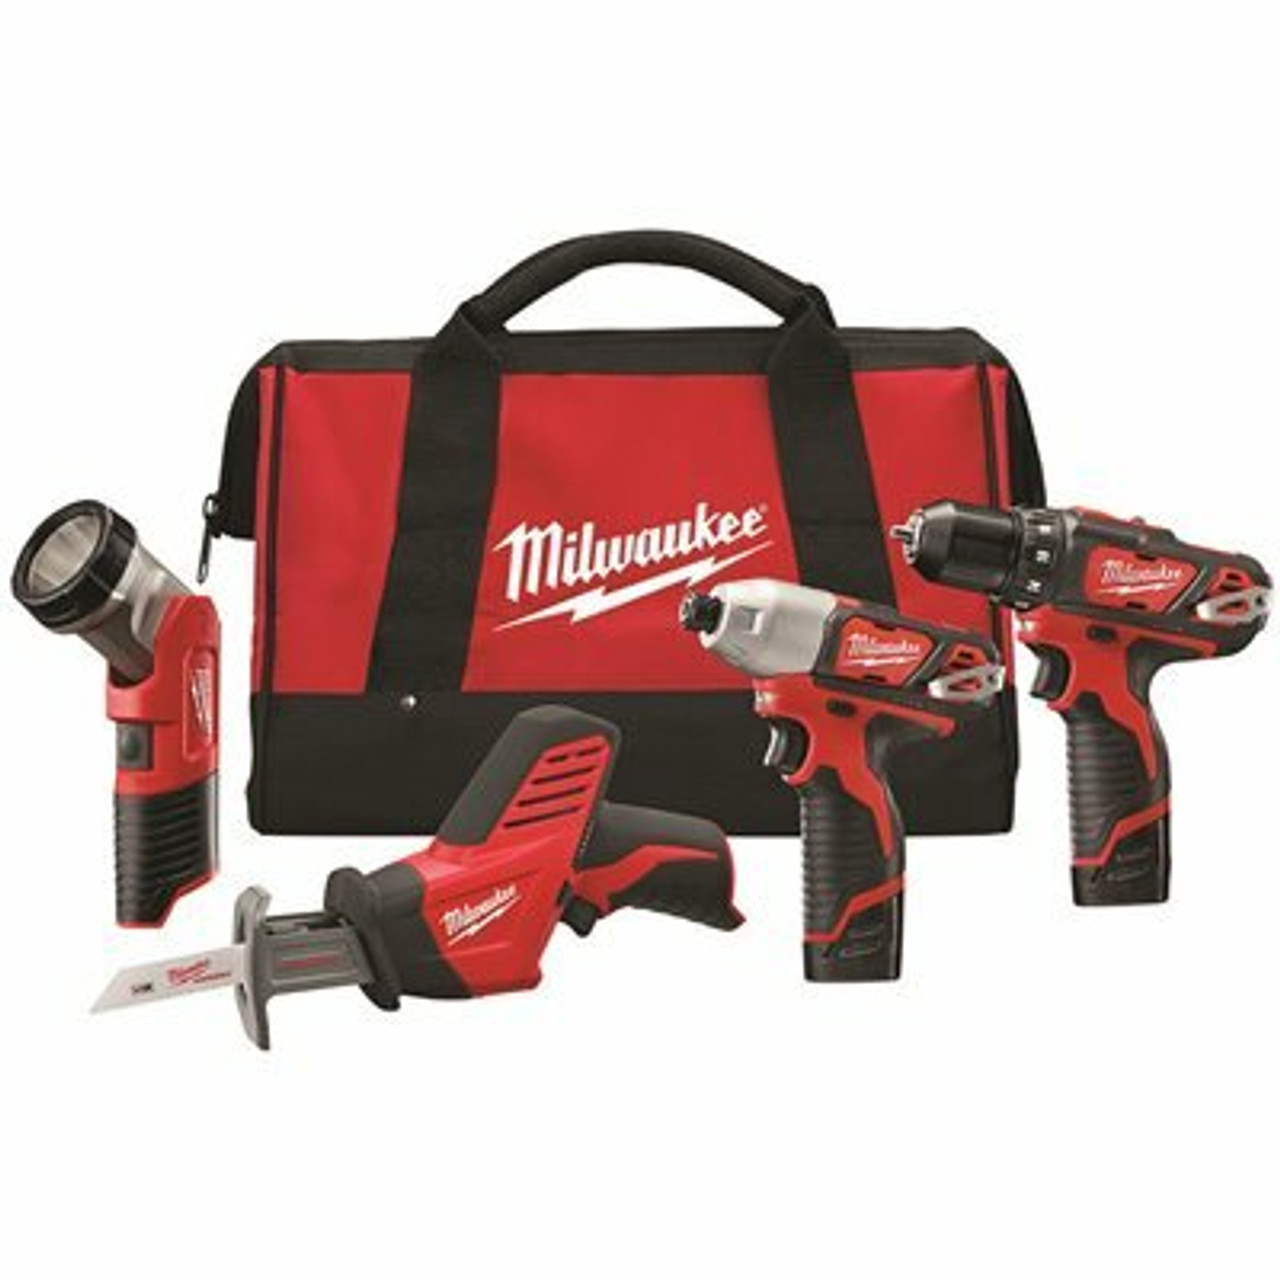 Milwaukee M12 12-Volt Lithium-Ion Cordless Combo Tool Kit With Two 1.5 Ah Batteries, 1 Charger, 1 Tool Bag (4-Tool)